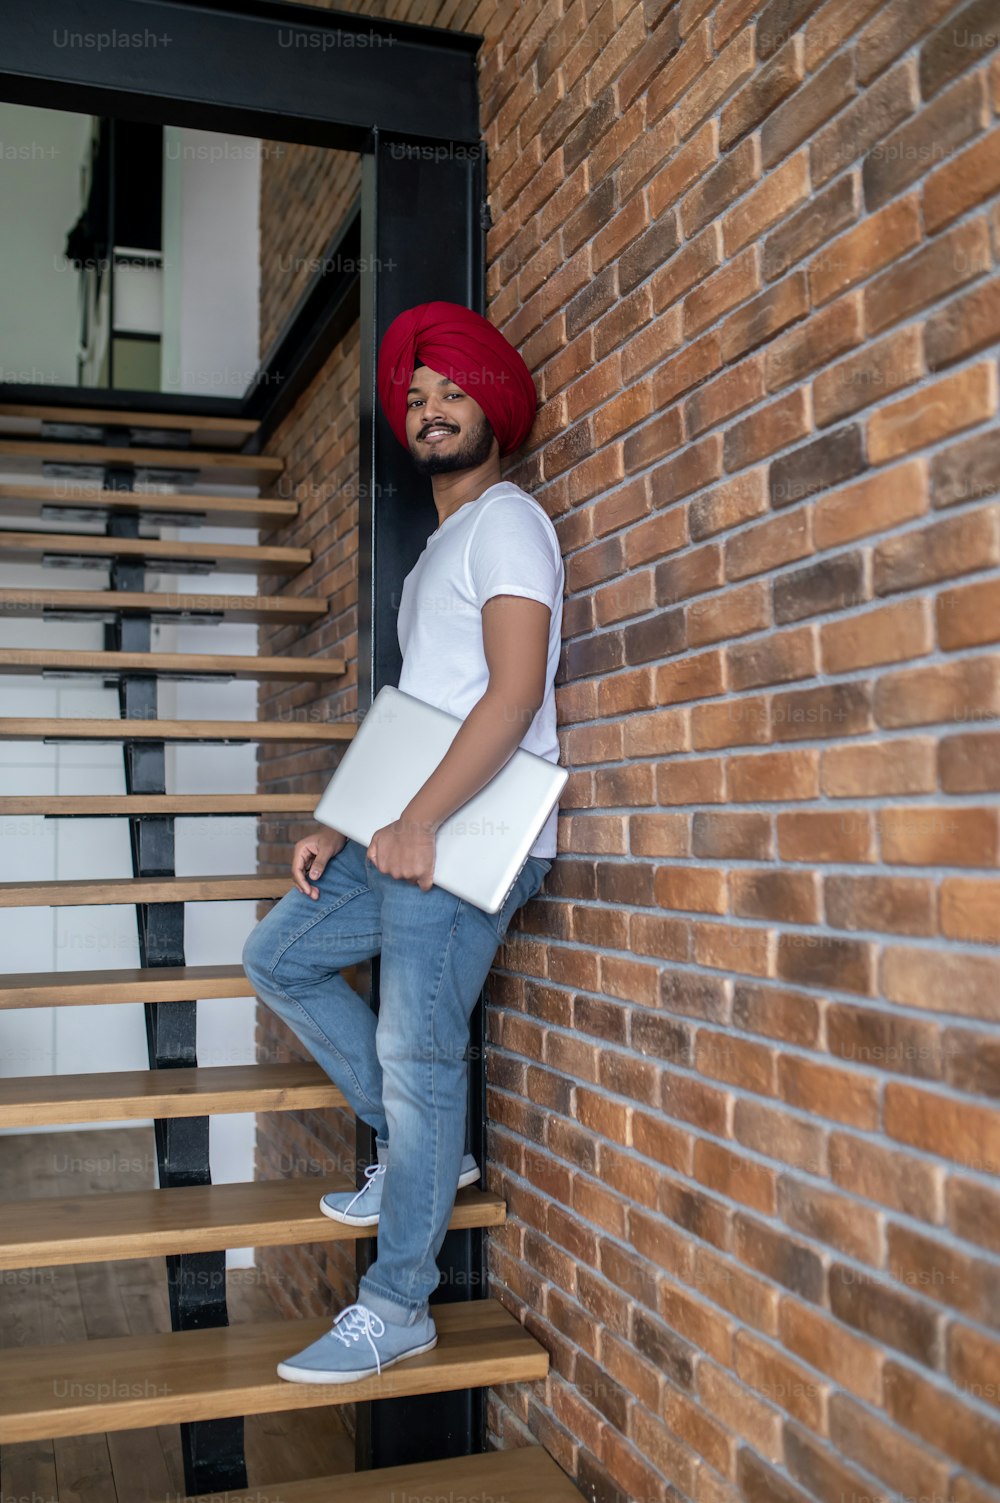 Work from home. Young indian man in red turban standing on stairs